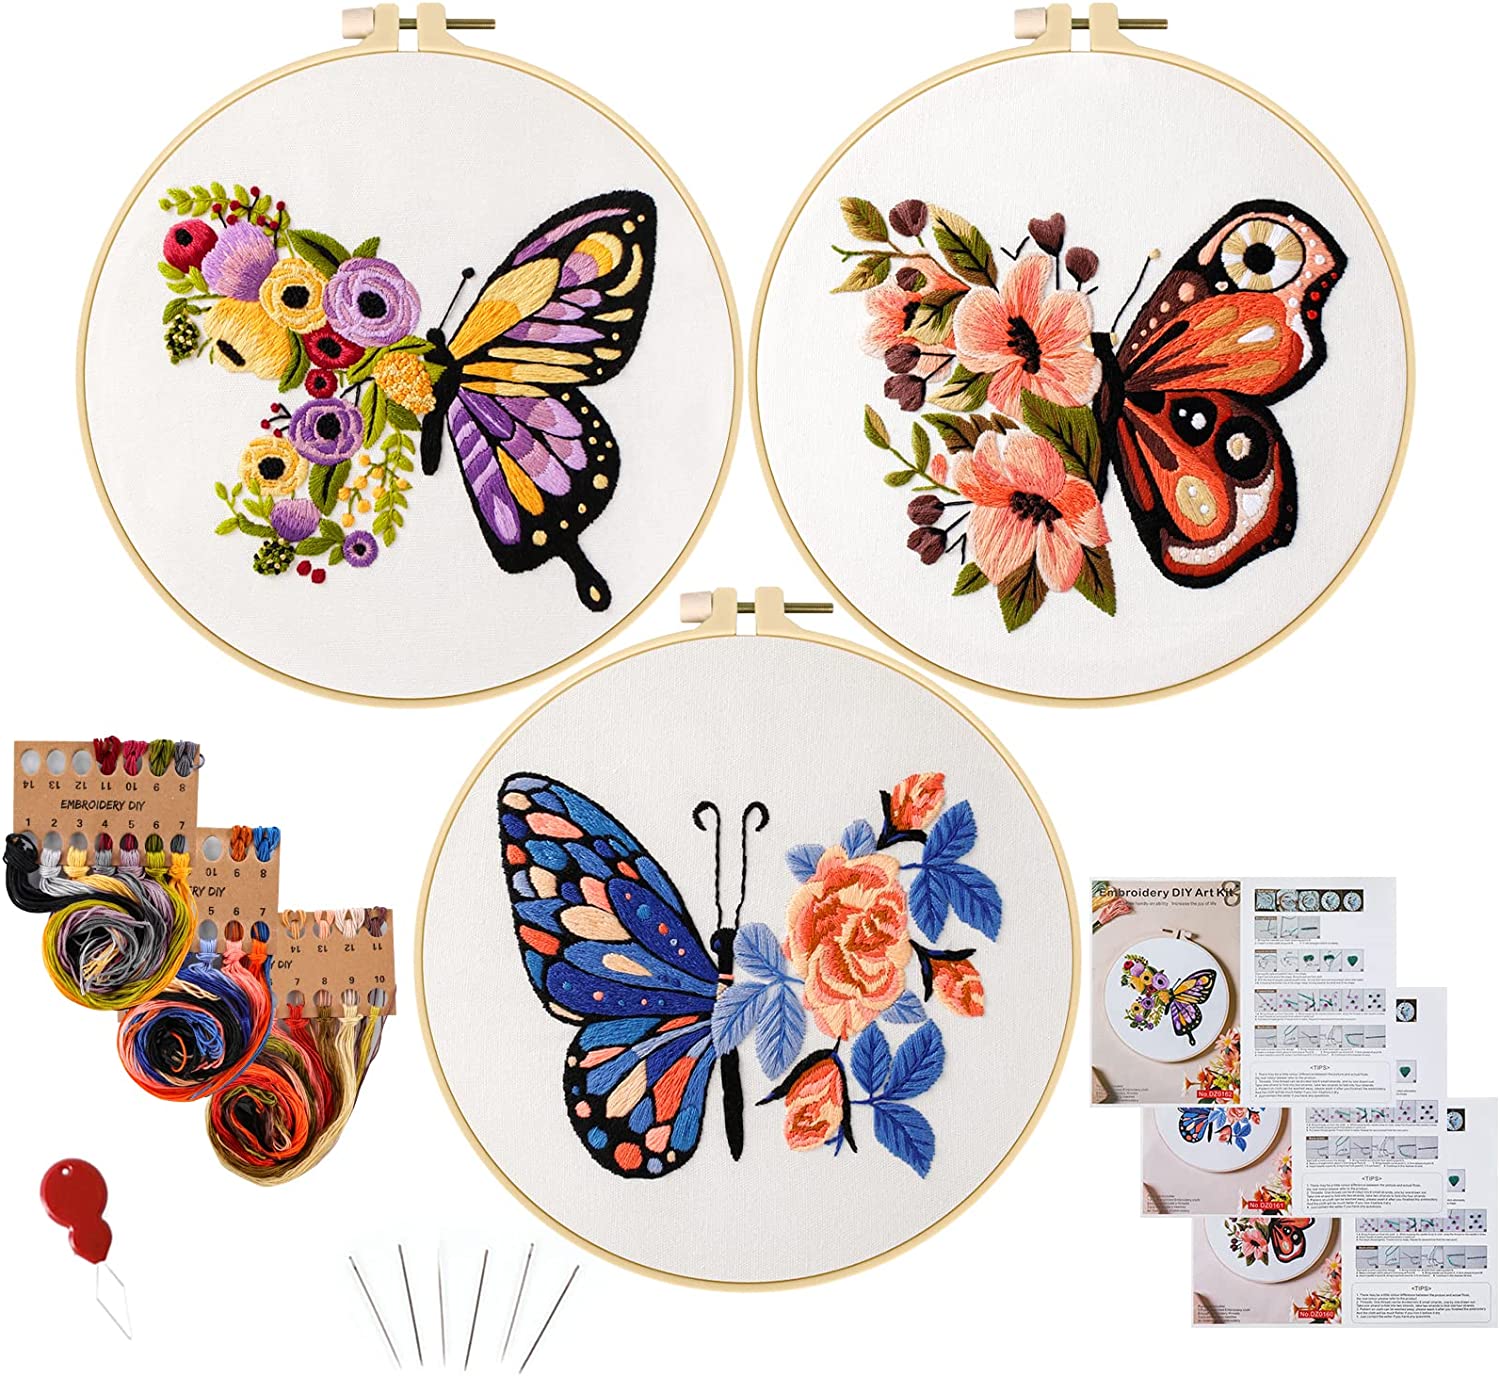 Embroidery Starter kit with Patterns and Instructions, DIY Adult Beginner  Cross Stitch Kits 